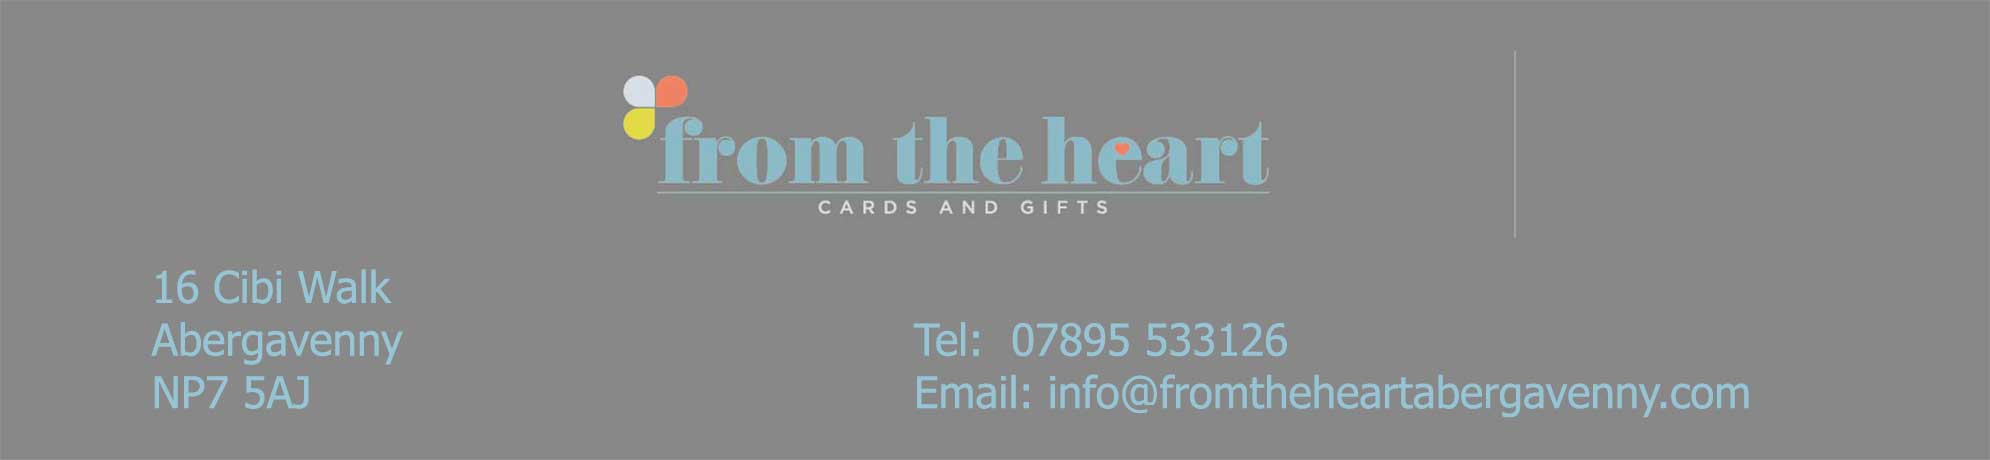 From the Heart Abergavenny contact details